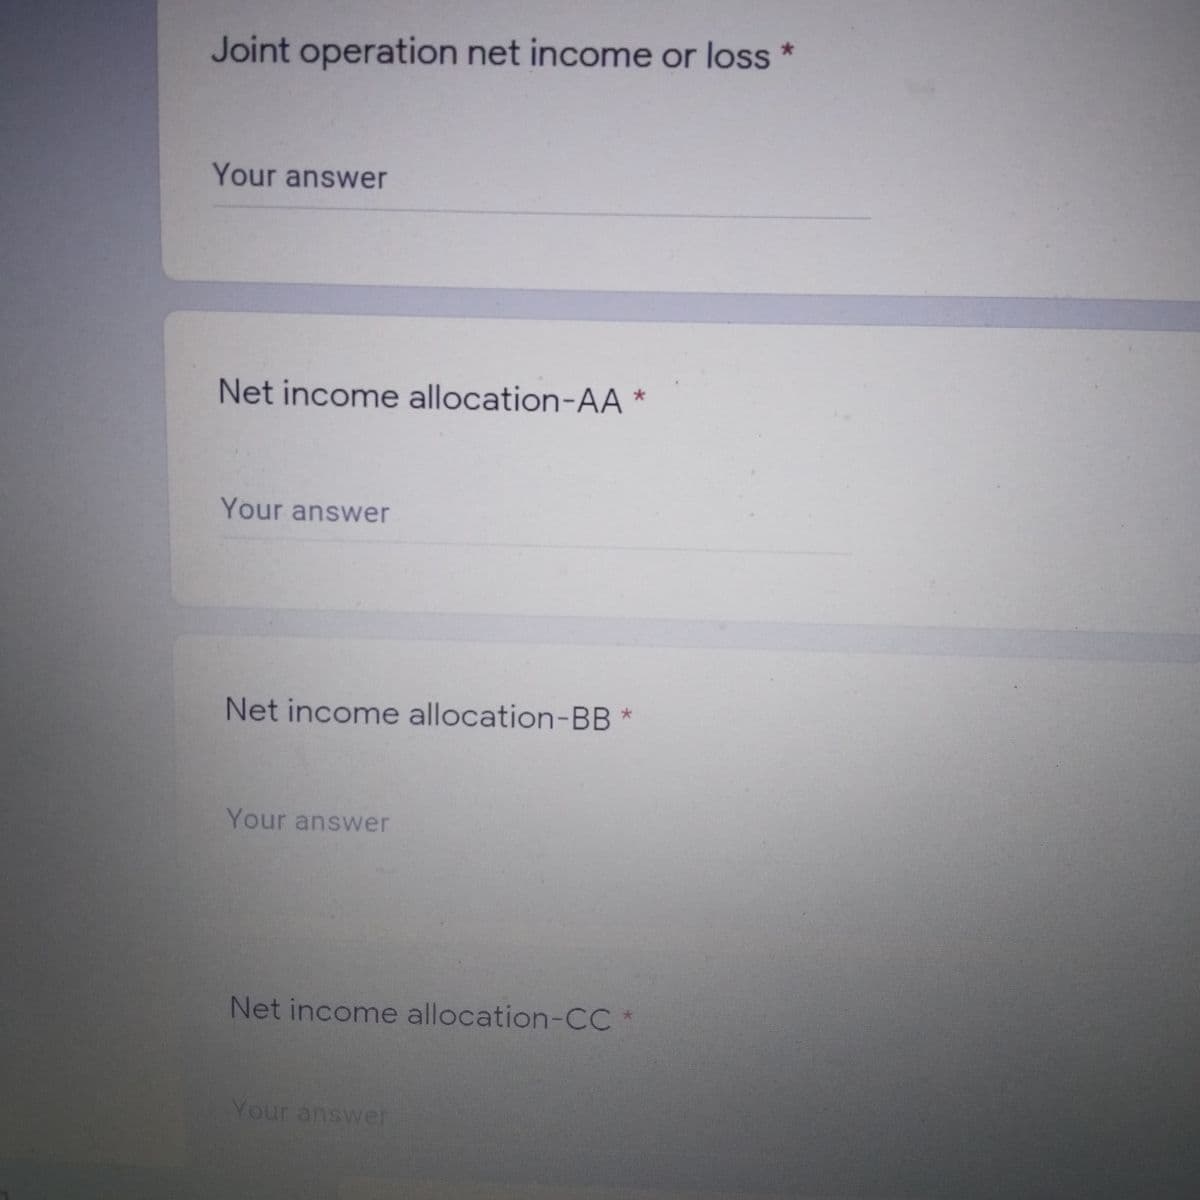 Joint operation net income or loss *
Your answer
Net income allocation-AA *
Your answer
Net income allocation-BB *
Your answer
Net income allocation-CC
Your answer
